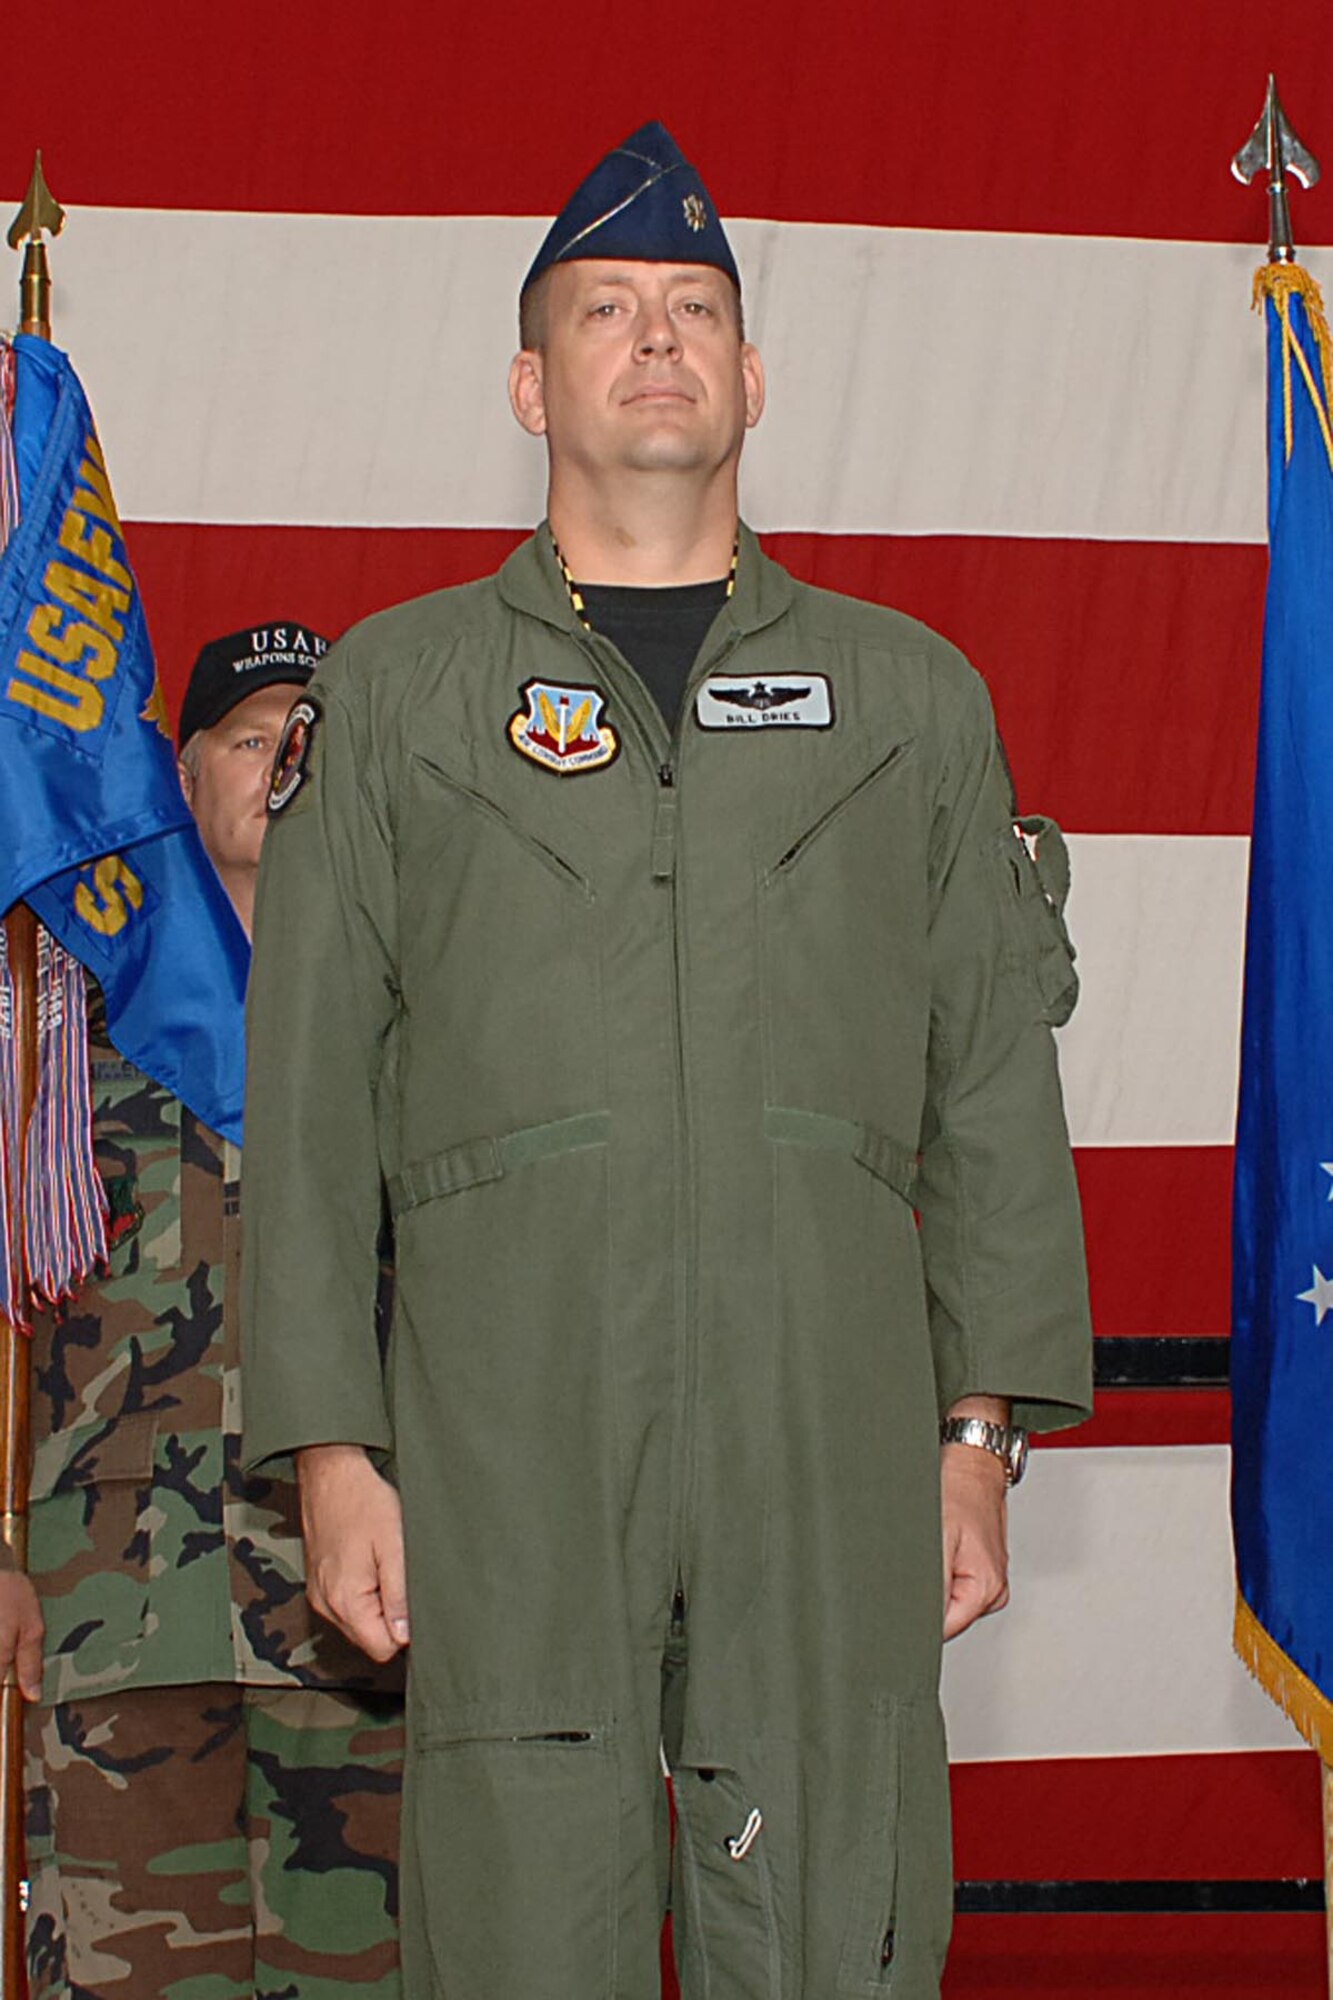 DYESS AIR FORCE BASE, Texas -- Lt. Col. William Dries assumes command of the 77th Weapons School during a change of command ceremony here June 25, 2007.
(U.S. Air Force photo/Senior Airman Domonique Simmons)